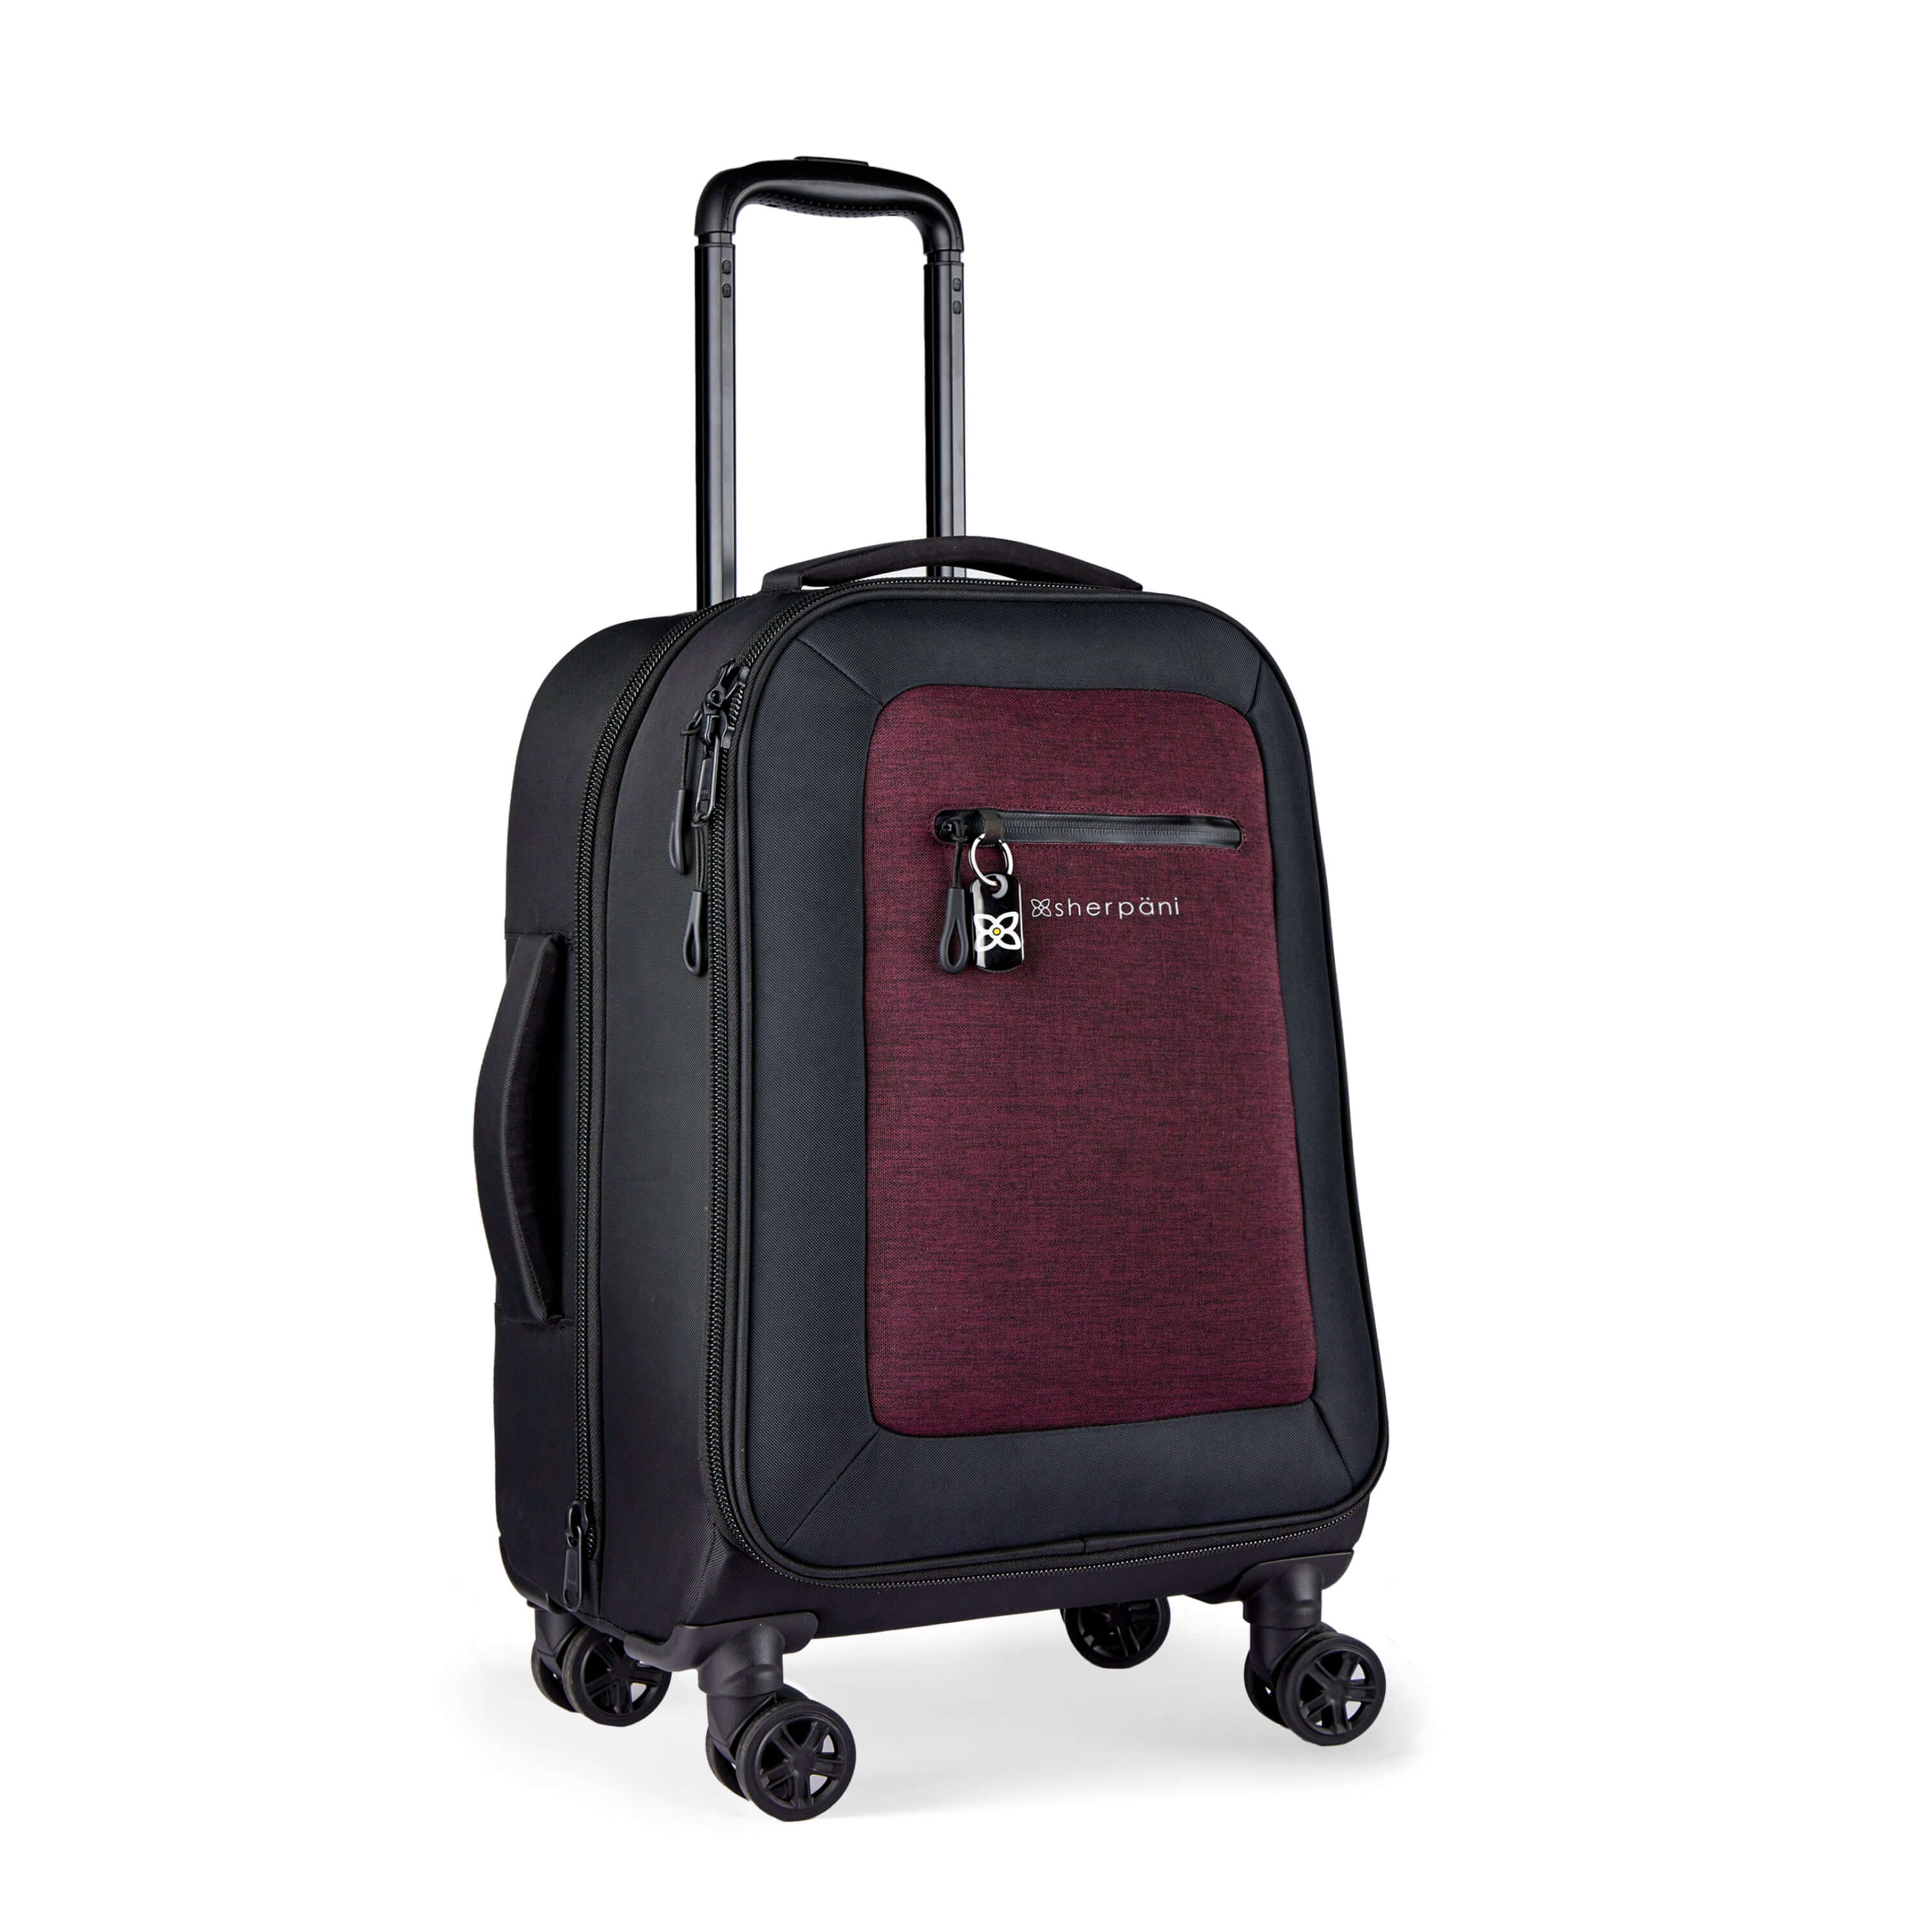 Angled front view of Sherpani's Anti-Theft luggage the Latitude in Merlot. The suitcase has a soft shell exterior made from recycled plastic bottles and features vegan leather accents in black. There is a main zipper compartment, an expansion zipper and an external pocket on the front with a locking zipper and a ReturnMe tag. On the top of the suitcase sits a retractable luggage handle. On the side sits an easy-access handle. At the bottom are four 360-degree spinner wheels for smooth rolling. #color_merlot